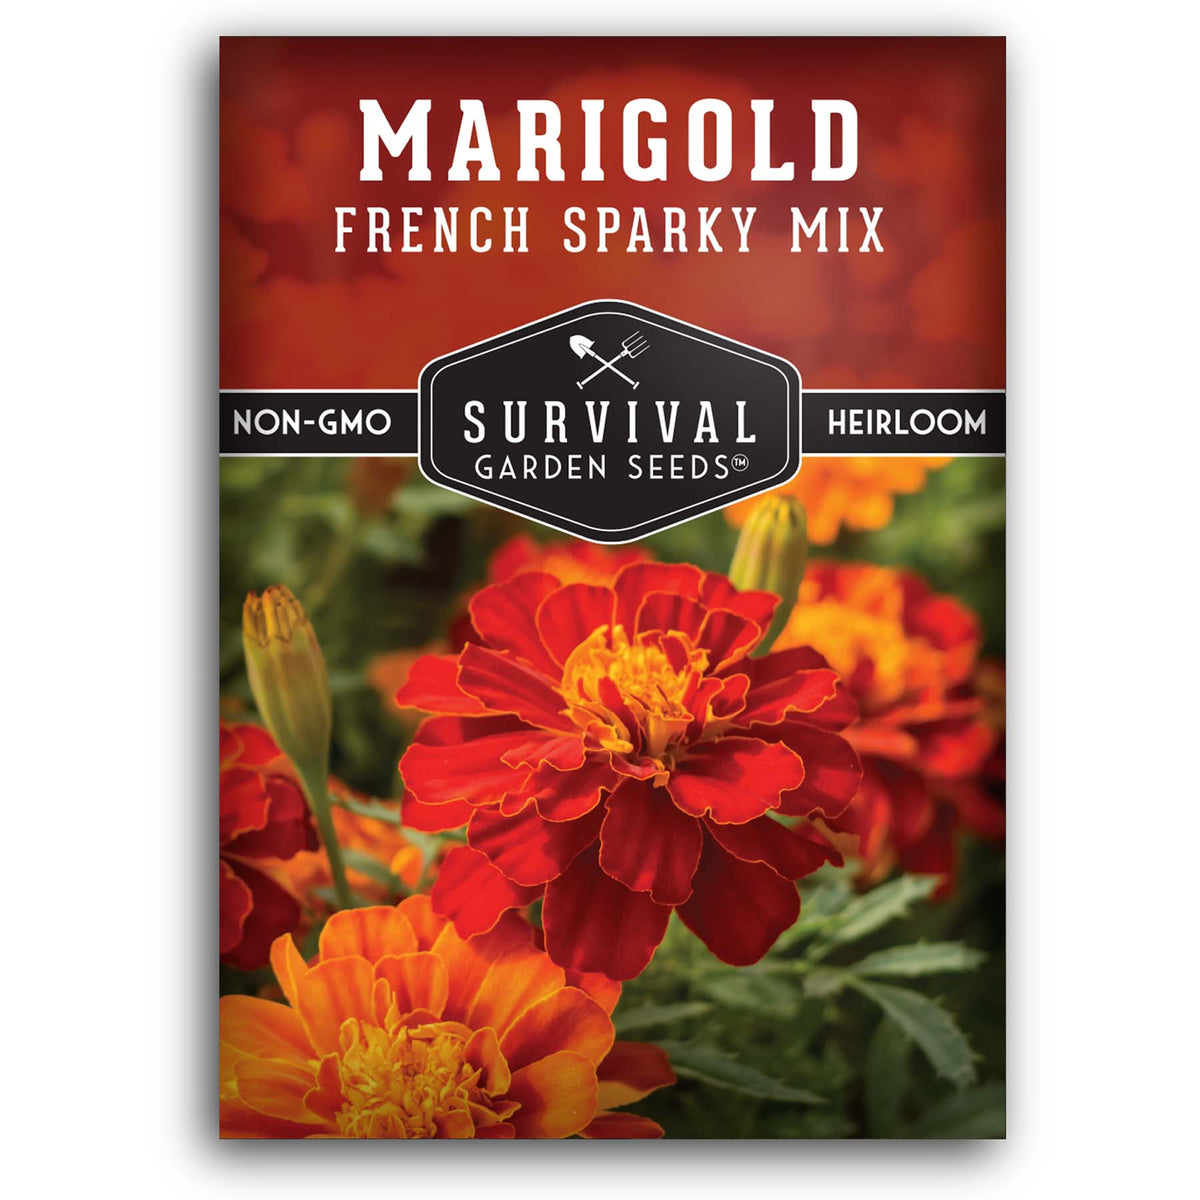 French Sparky Mix Marigold seeds for planting